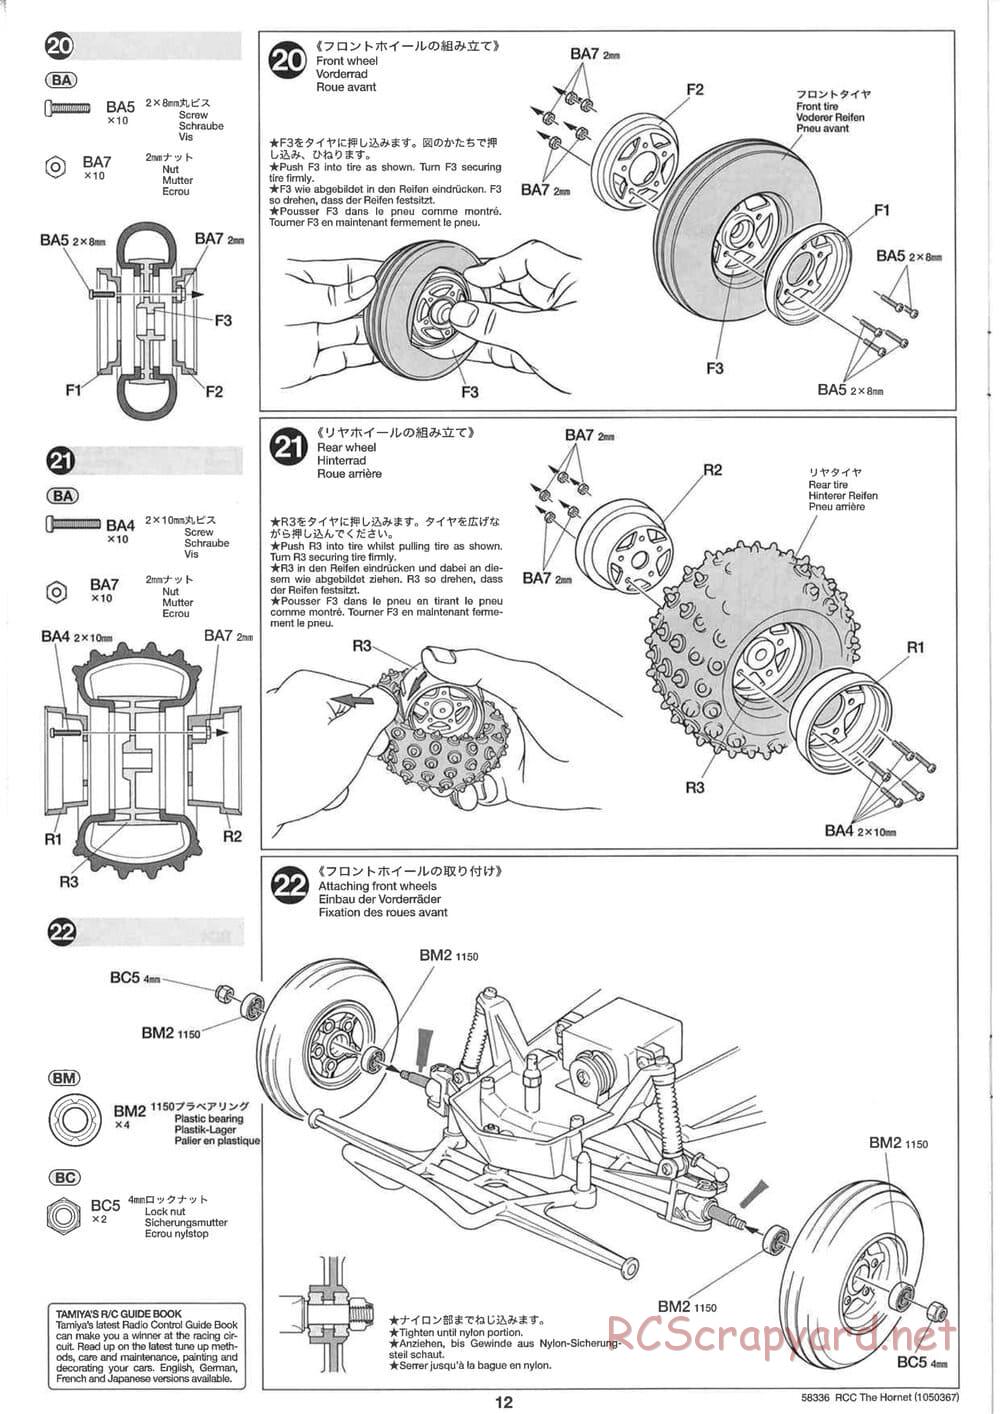 Tamiya - The Hornet (2004) - GH Chassis - Manual - Page 12